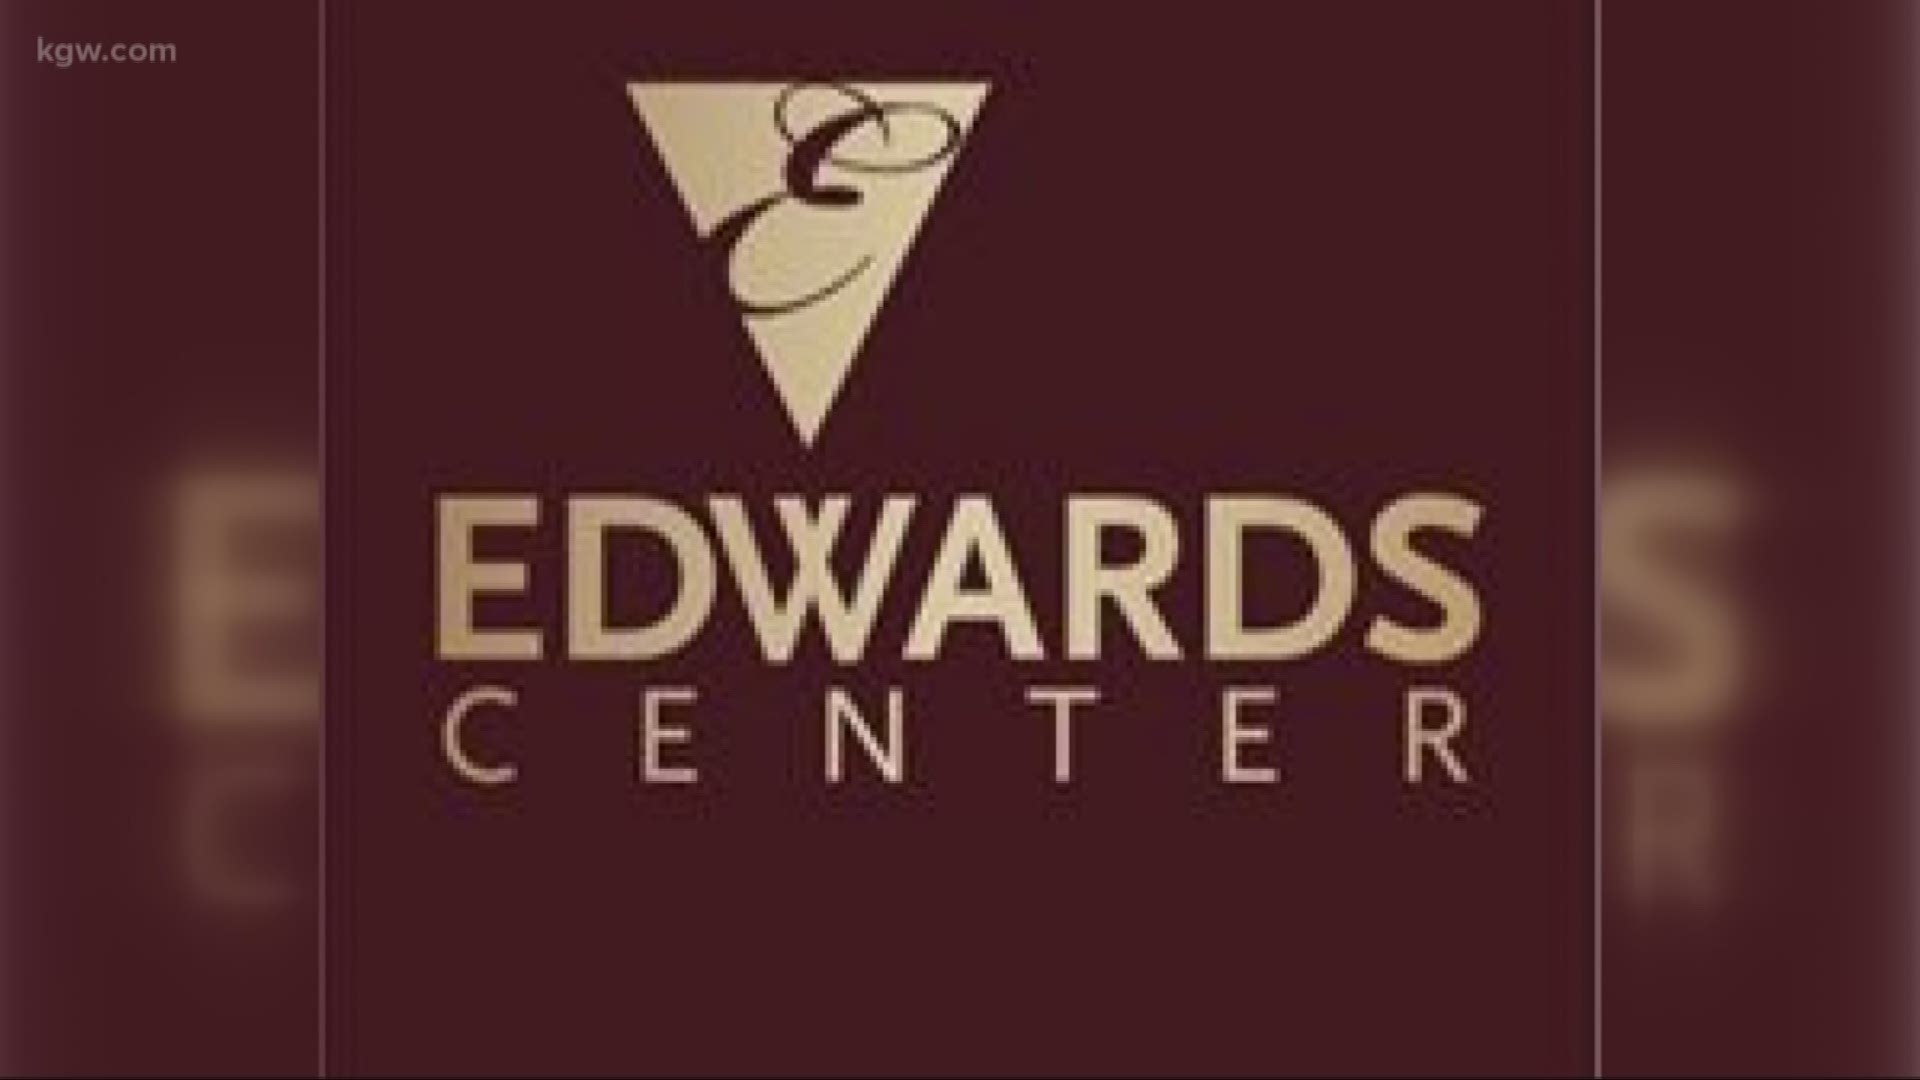 The Edwards Center is facing challenges during the coronavirus pandemic. Art Edwards reports.